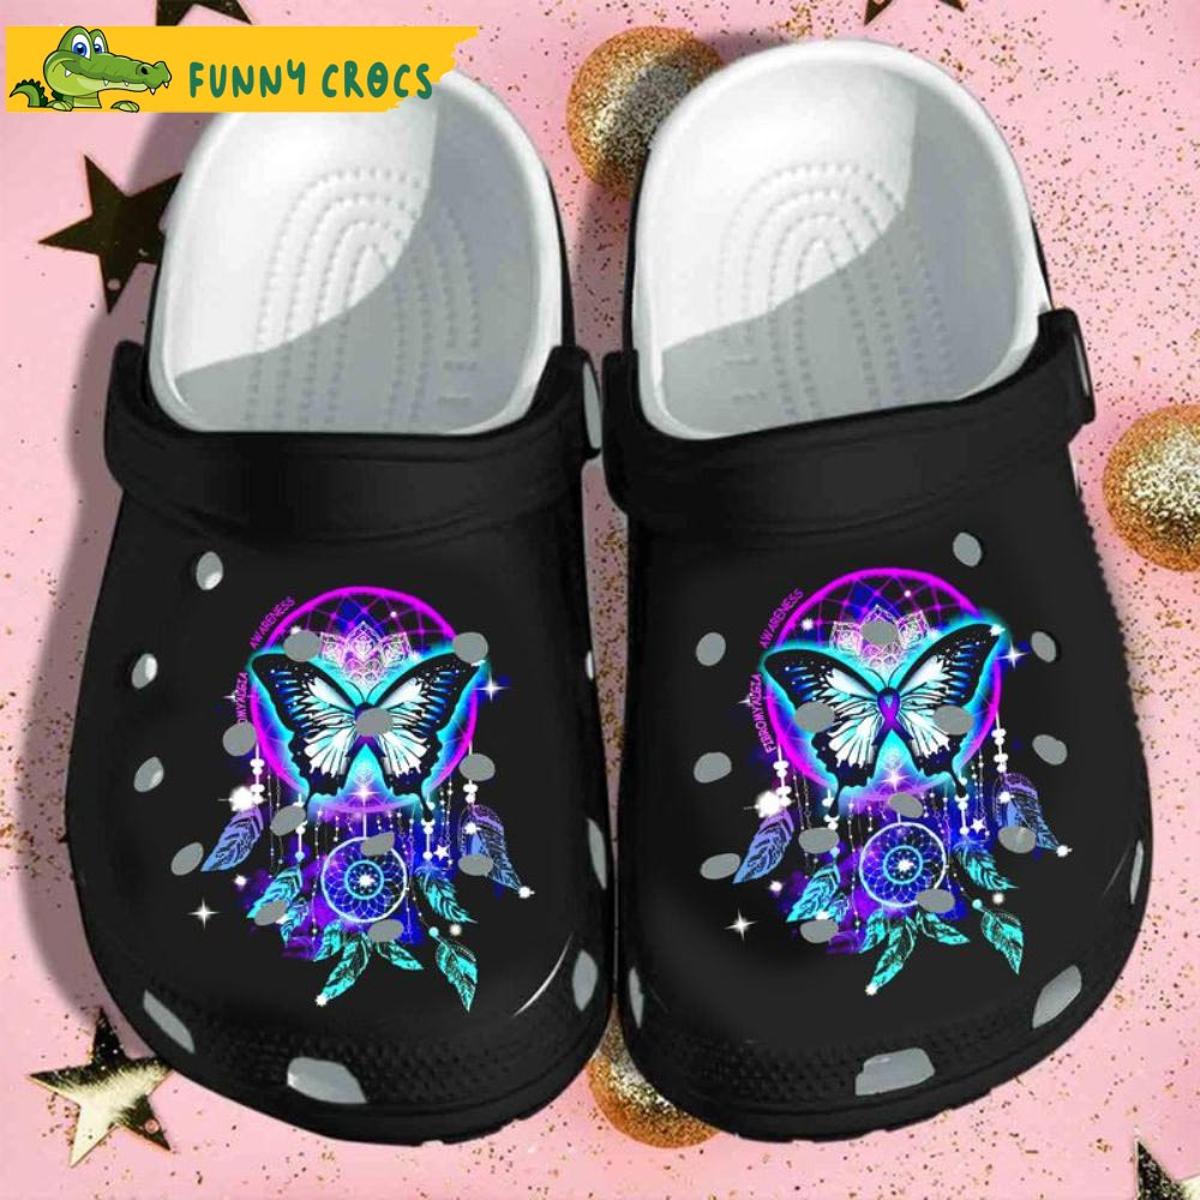 Suicide Prevention Awareness Butterfly Crocs Slippers